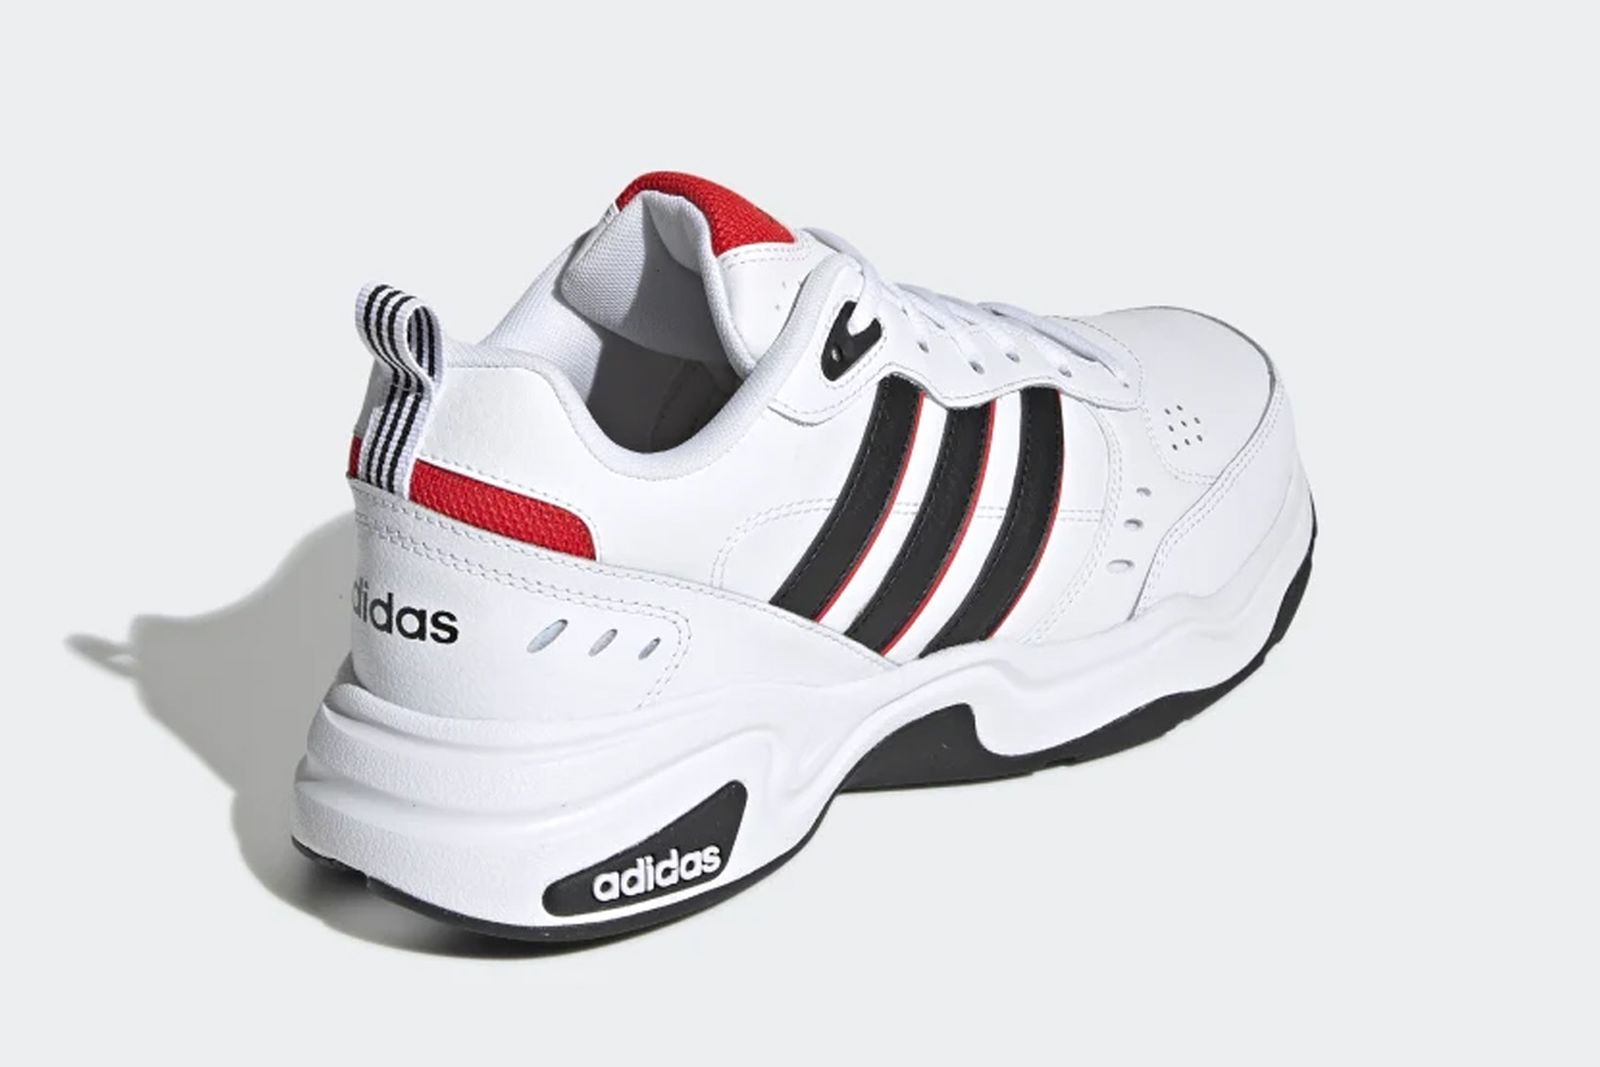 The adidas Strutter Looks Like Another Very Popular Dad Shoe عمر مزخرف